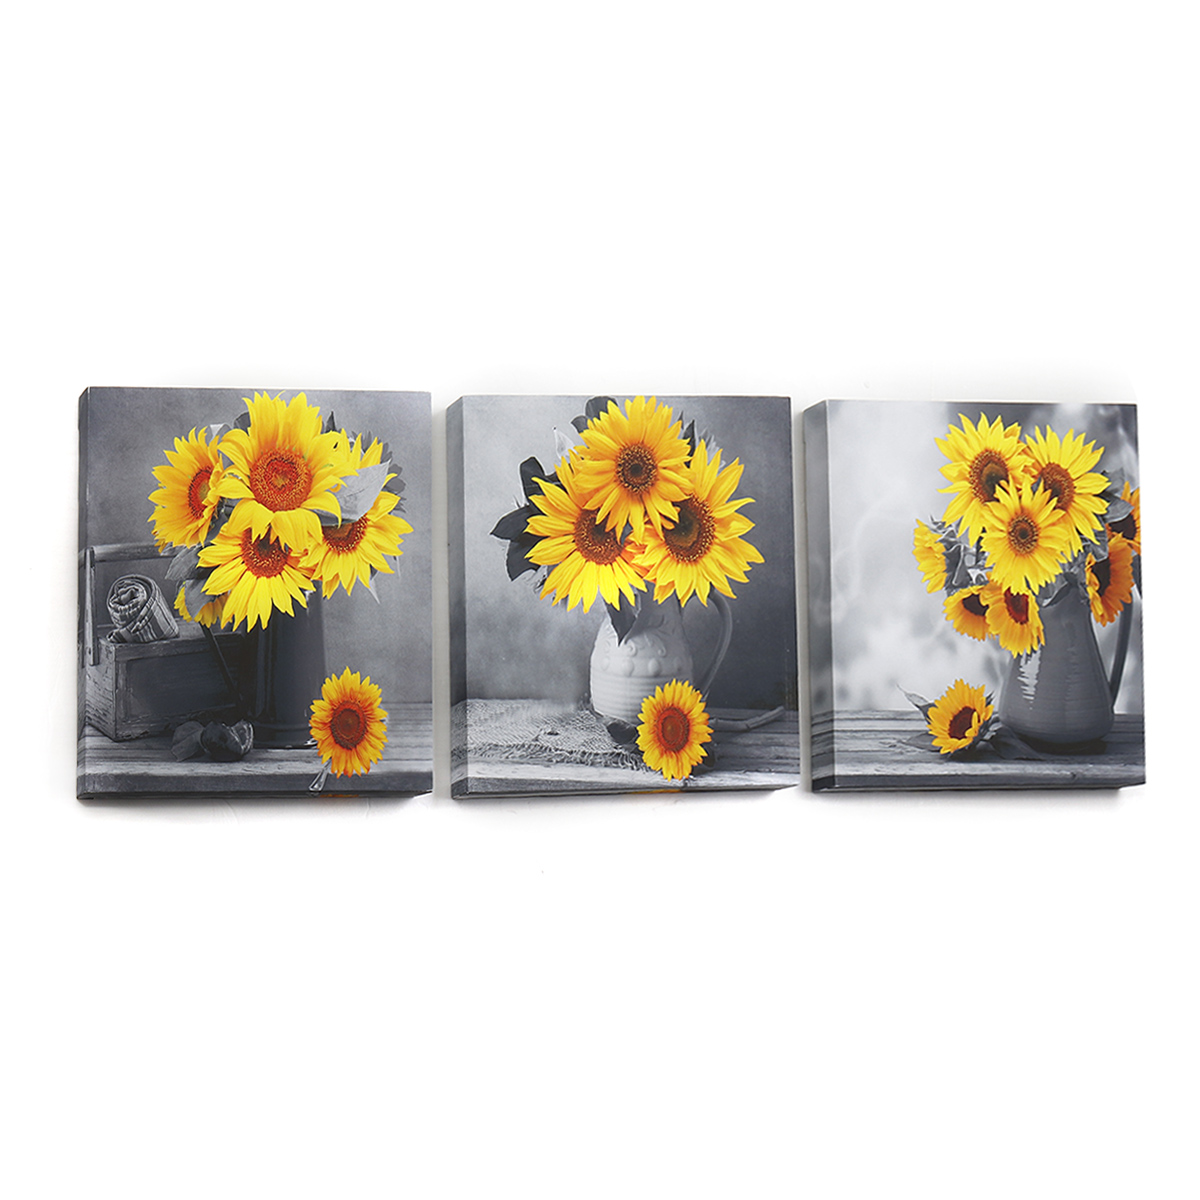 30303-cm-Sunflower-Wall-Art-Painting-Living-Room-Bedroom-Hanging-Canvas-Pictures-Office-Mural-Decora-1791798-8